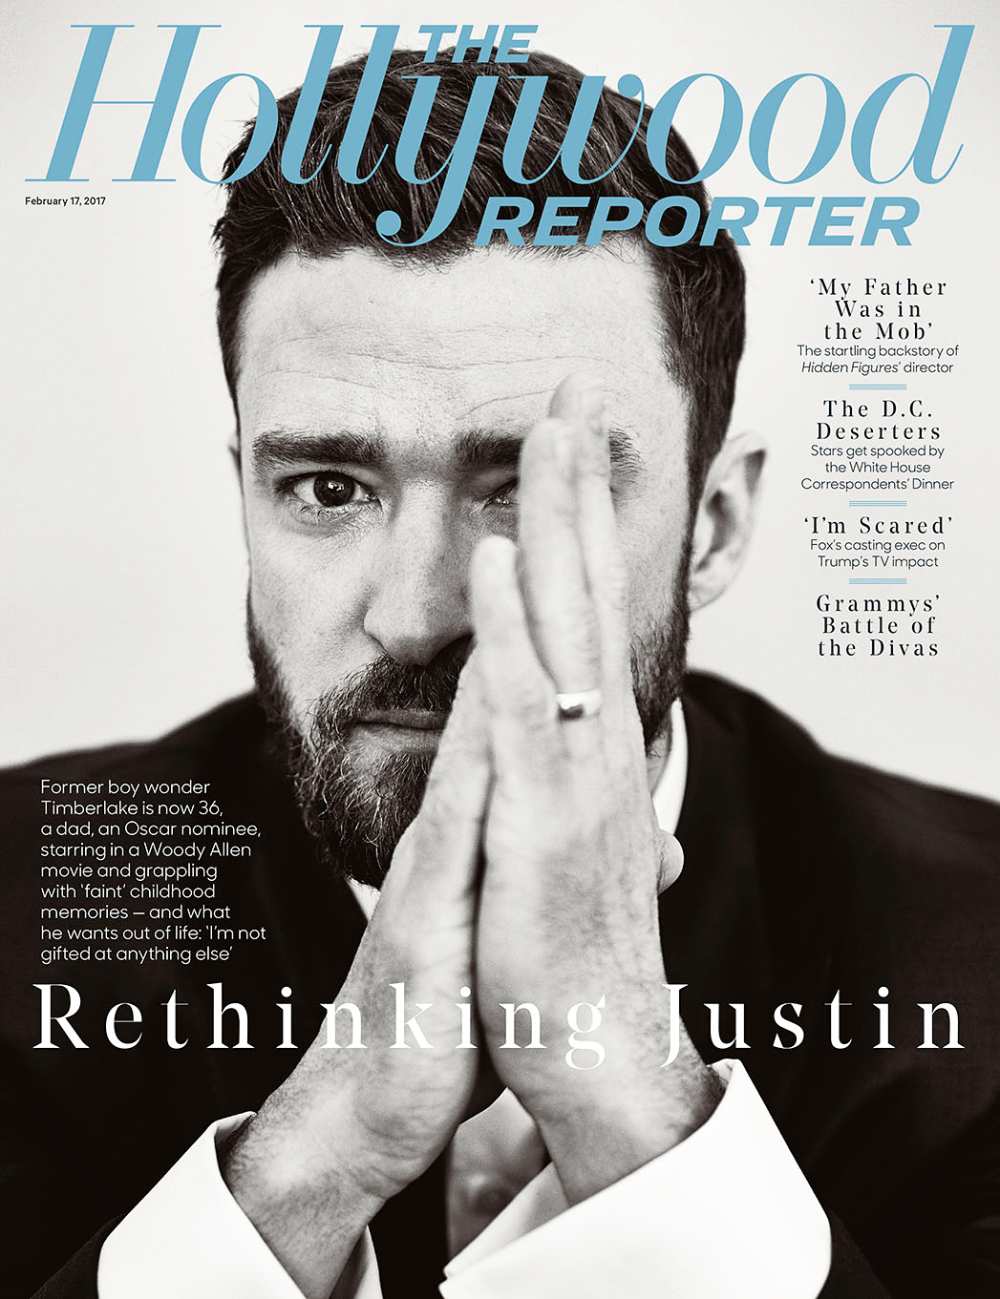 Justin Timberlake on the cover of 'The Hollywood Reporter'.